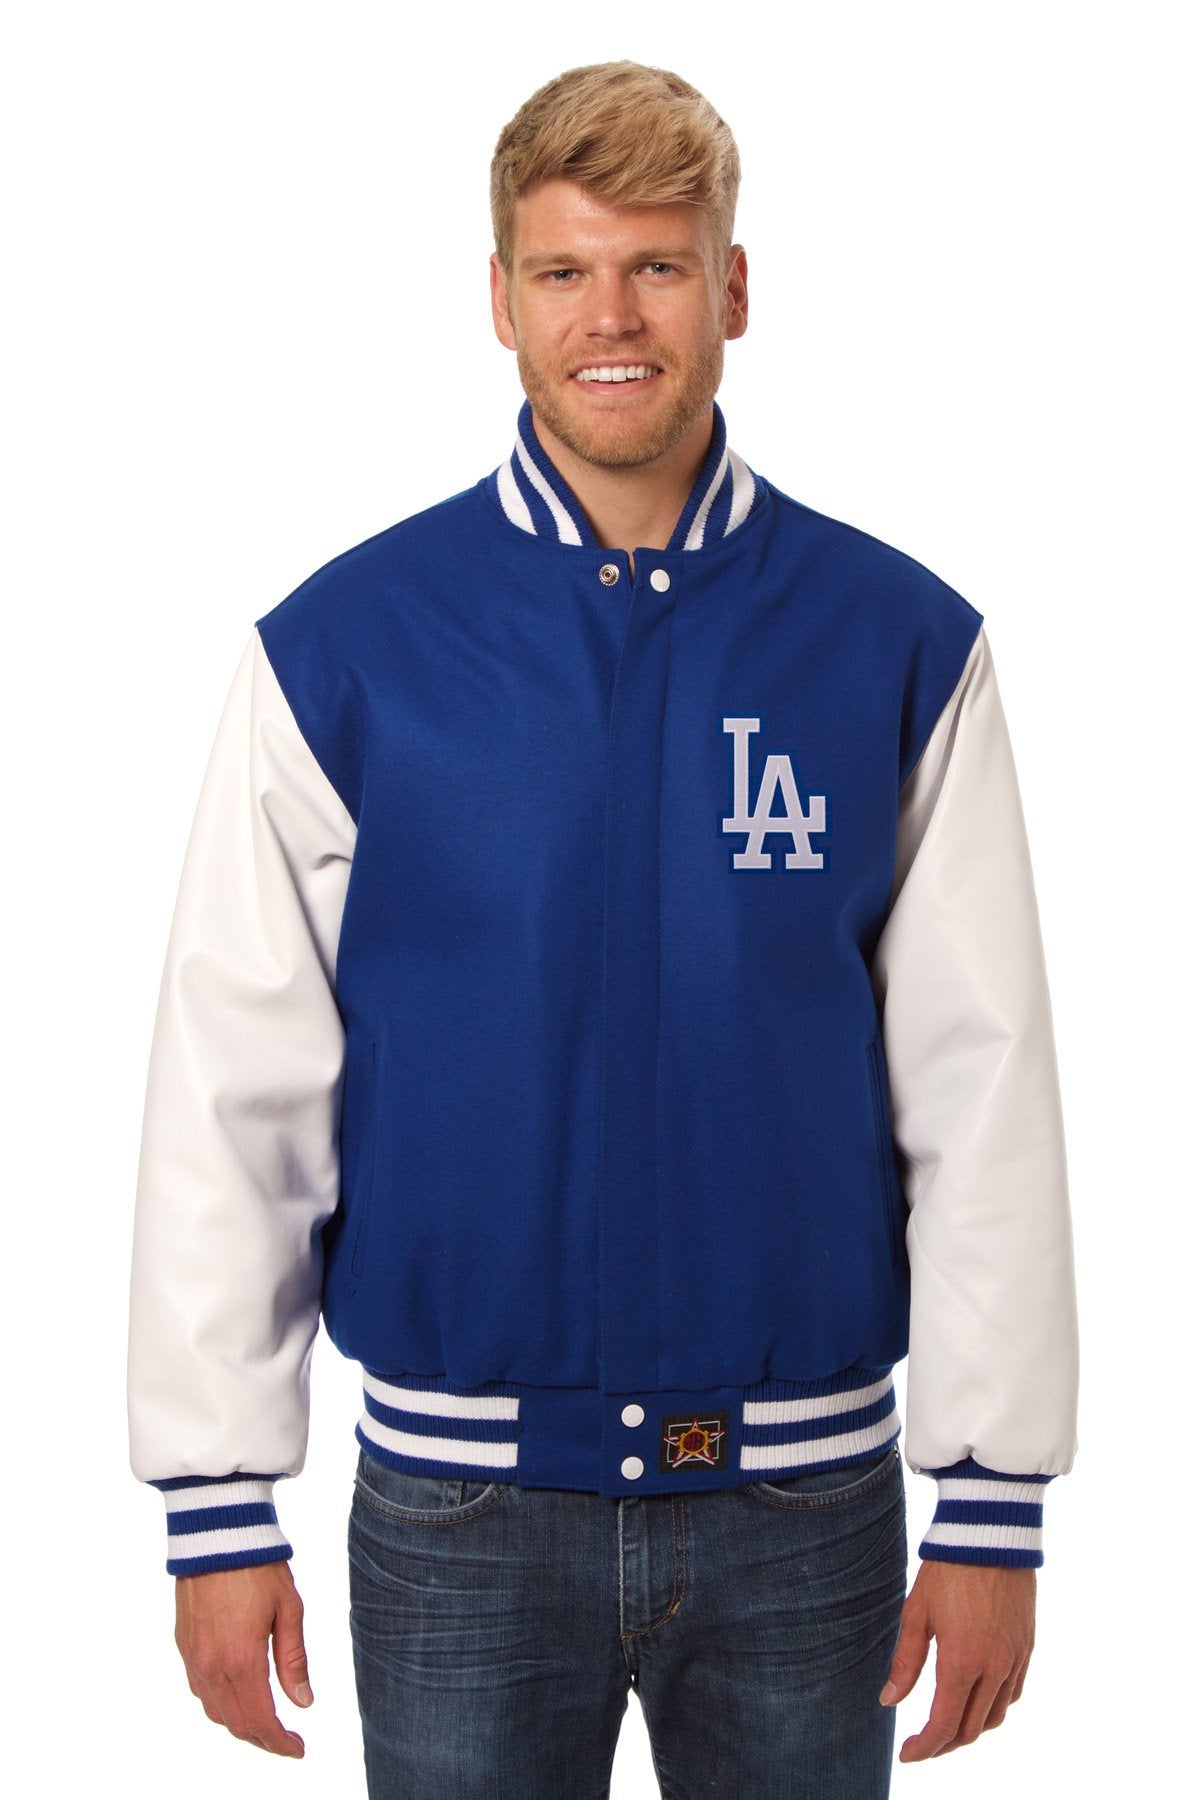 Los Angeles Dodgers Two-Tone Wool Jacket w/ Handcrafted Leather Logos - Royal/White X-Large